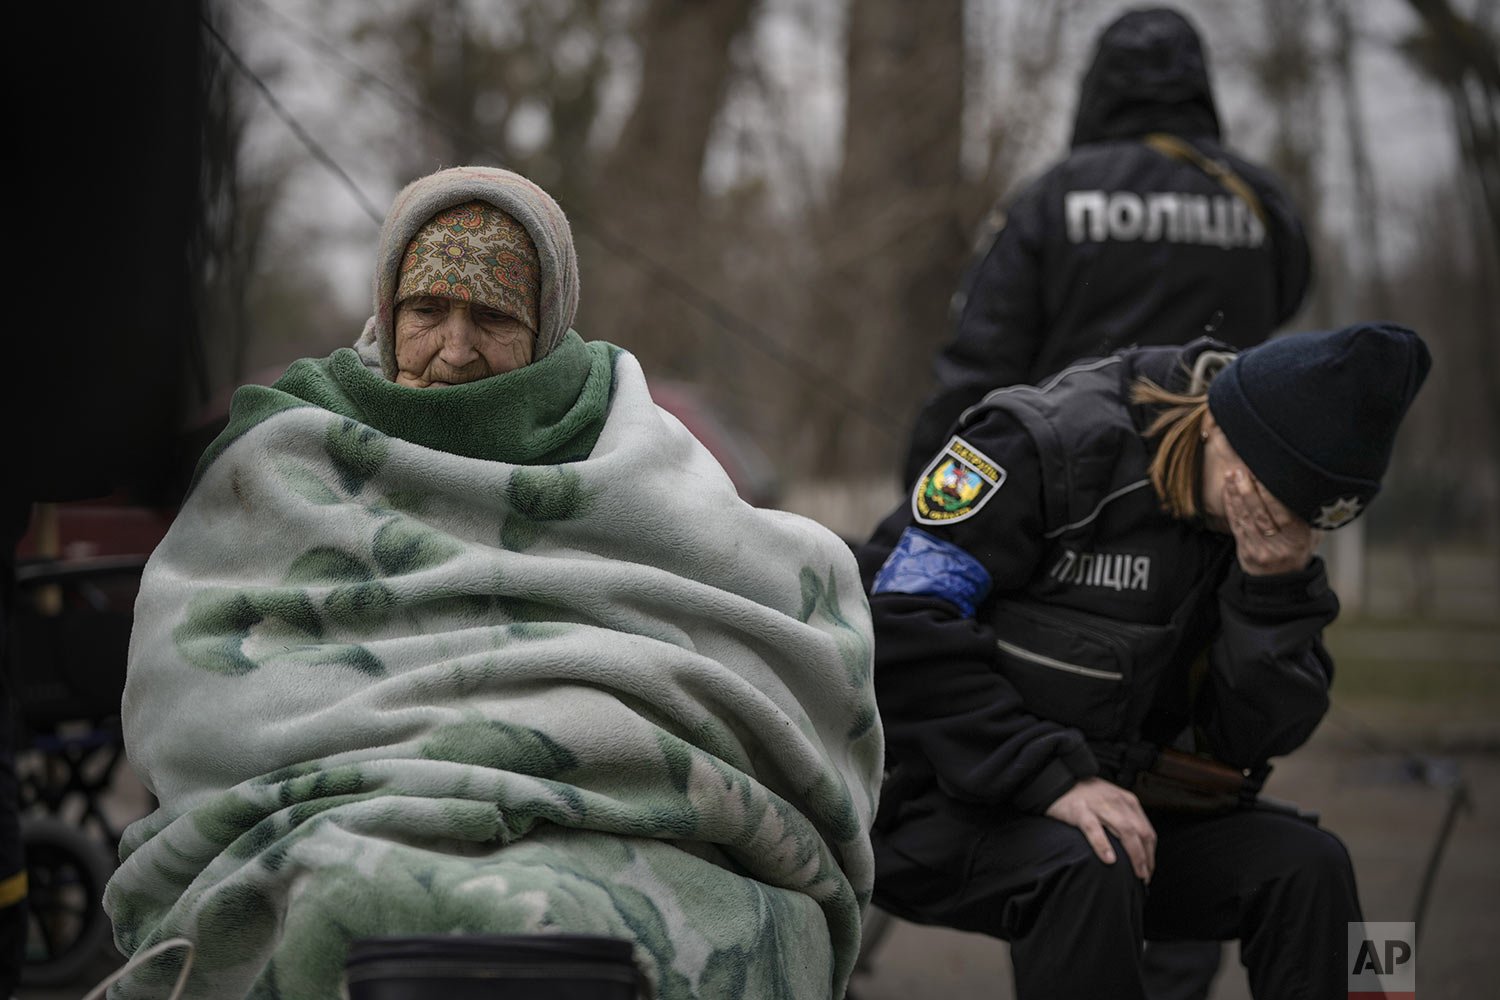  A Ukrainian police officer is overwhelmed by emotion after comforting people evacuated from Irpin on the outskirts of Kyiv, Ukraine, Saturday, March 26, 2022. Russia continues to pound cities throughout Ukraine — explosions rang out Saturday near th